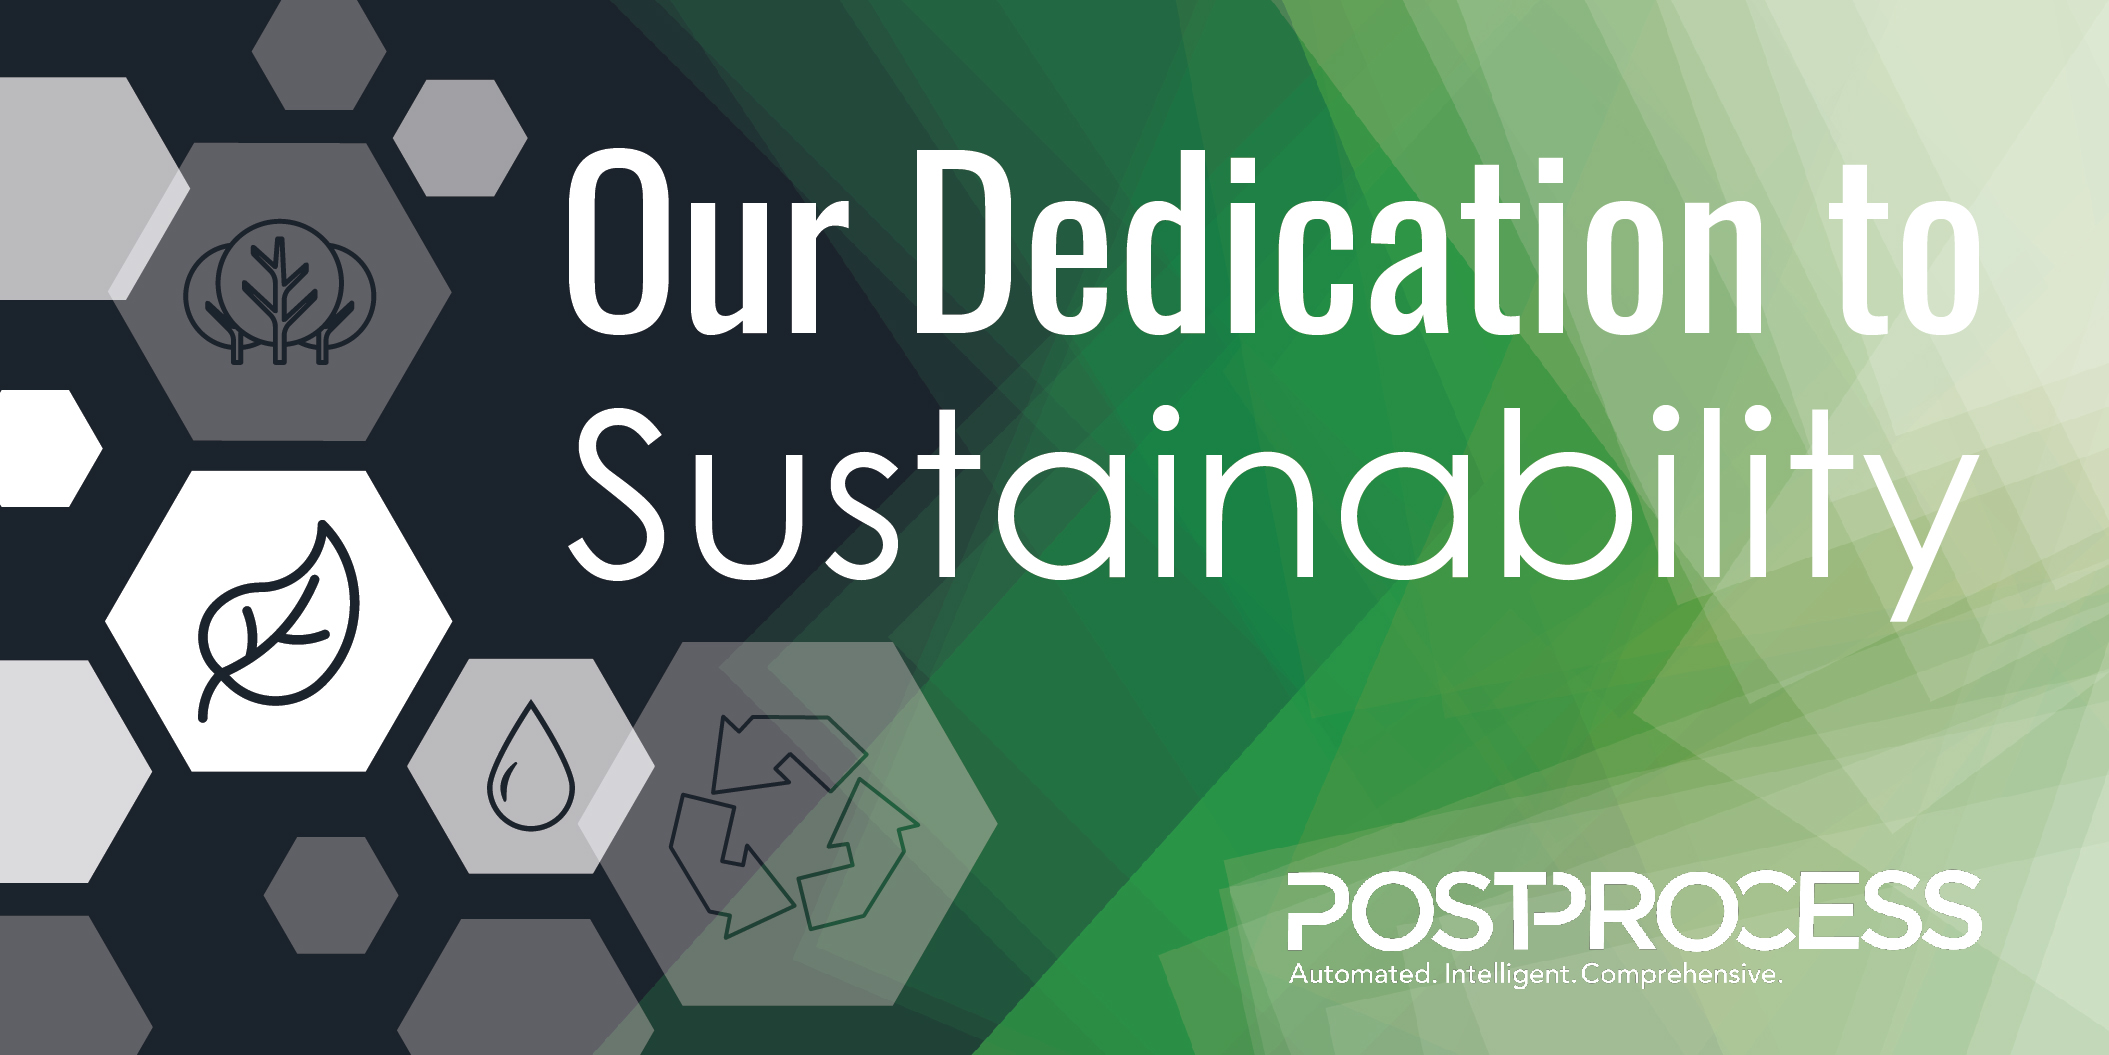 Our dedication to sustainability with postprocess logo.